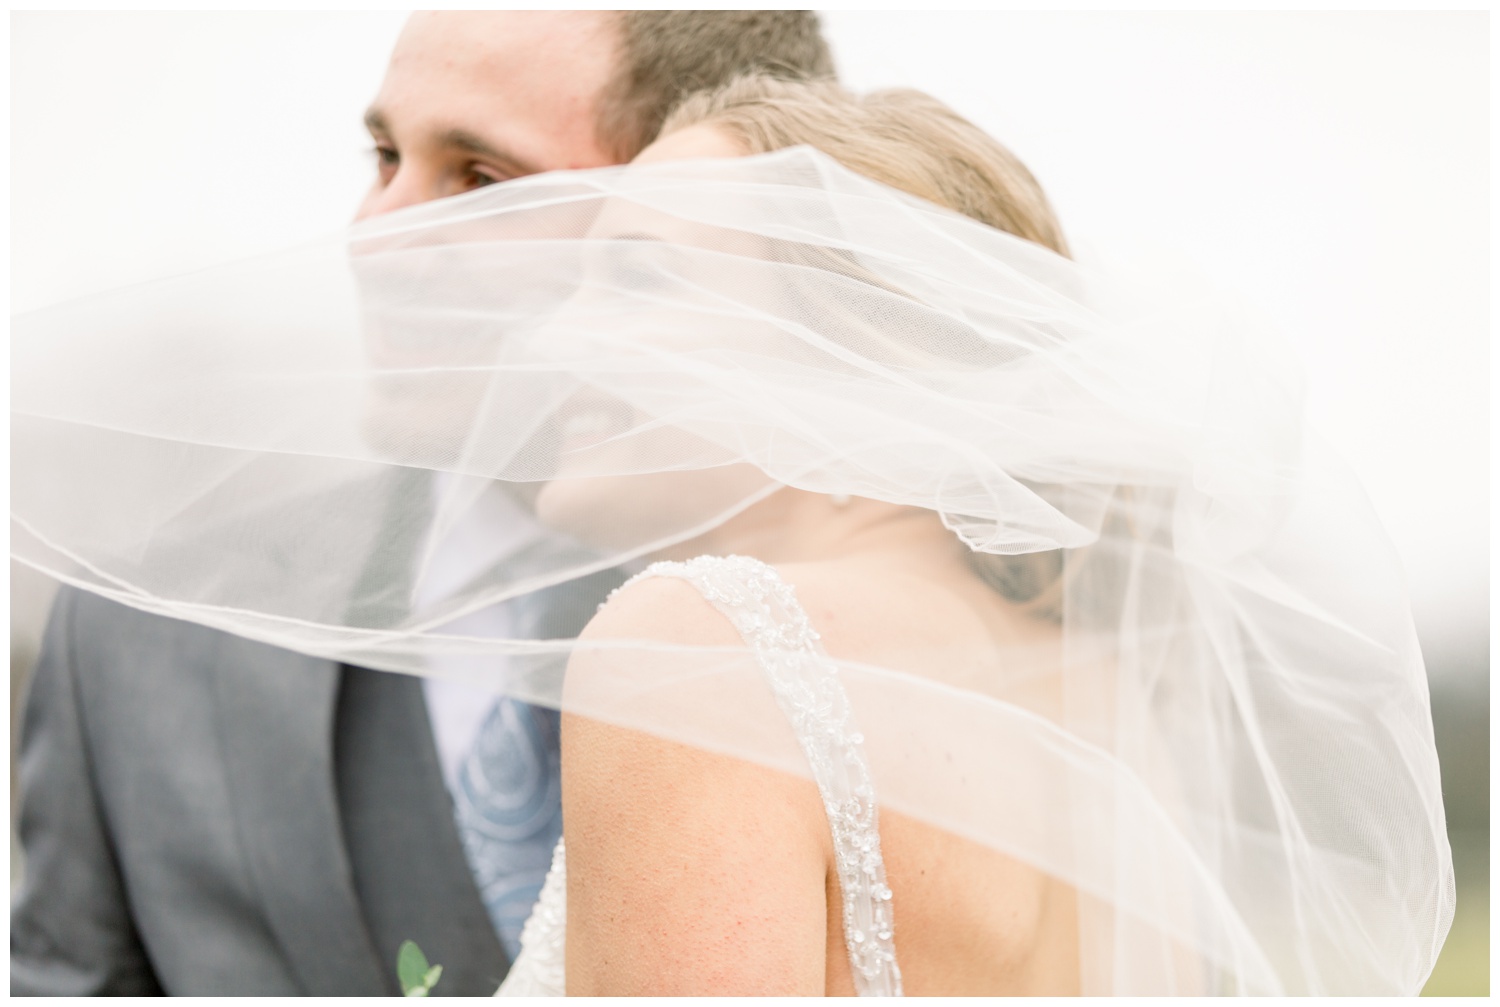 Veil Blowing in Wind - Bride and Groom with Veil